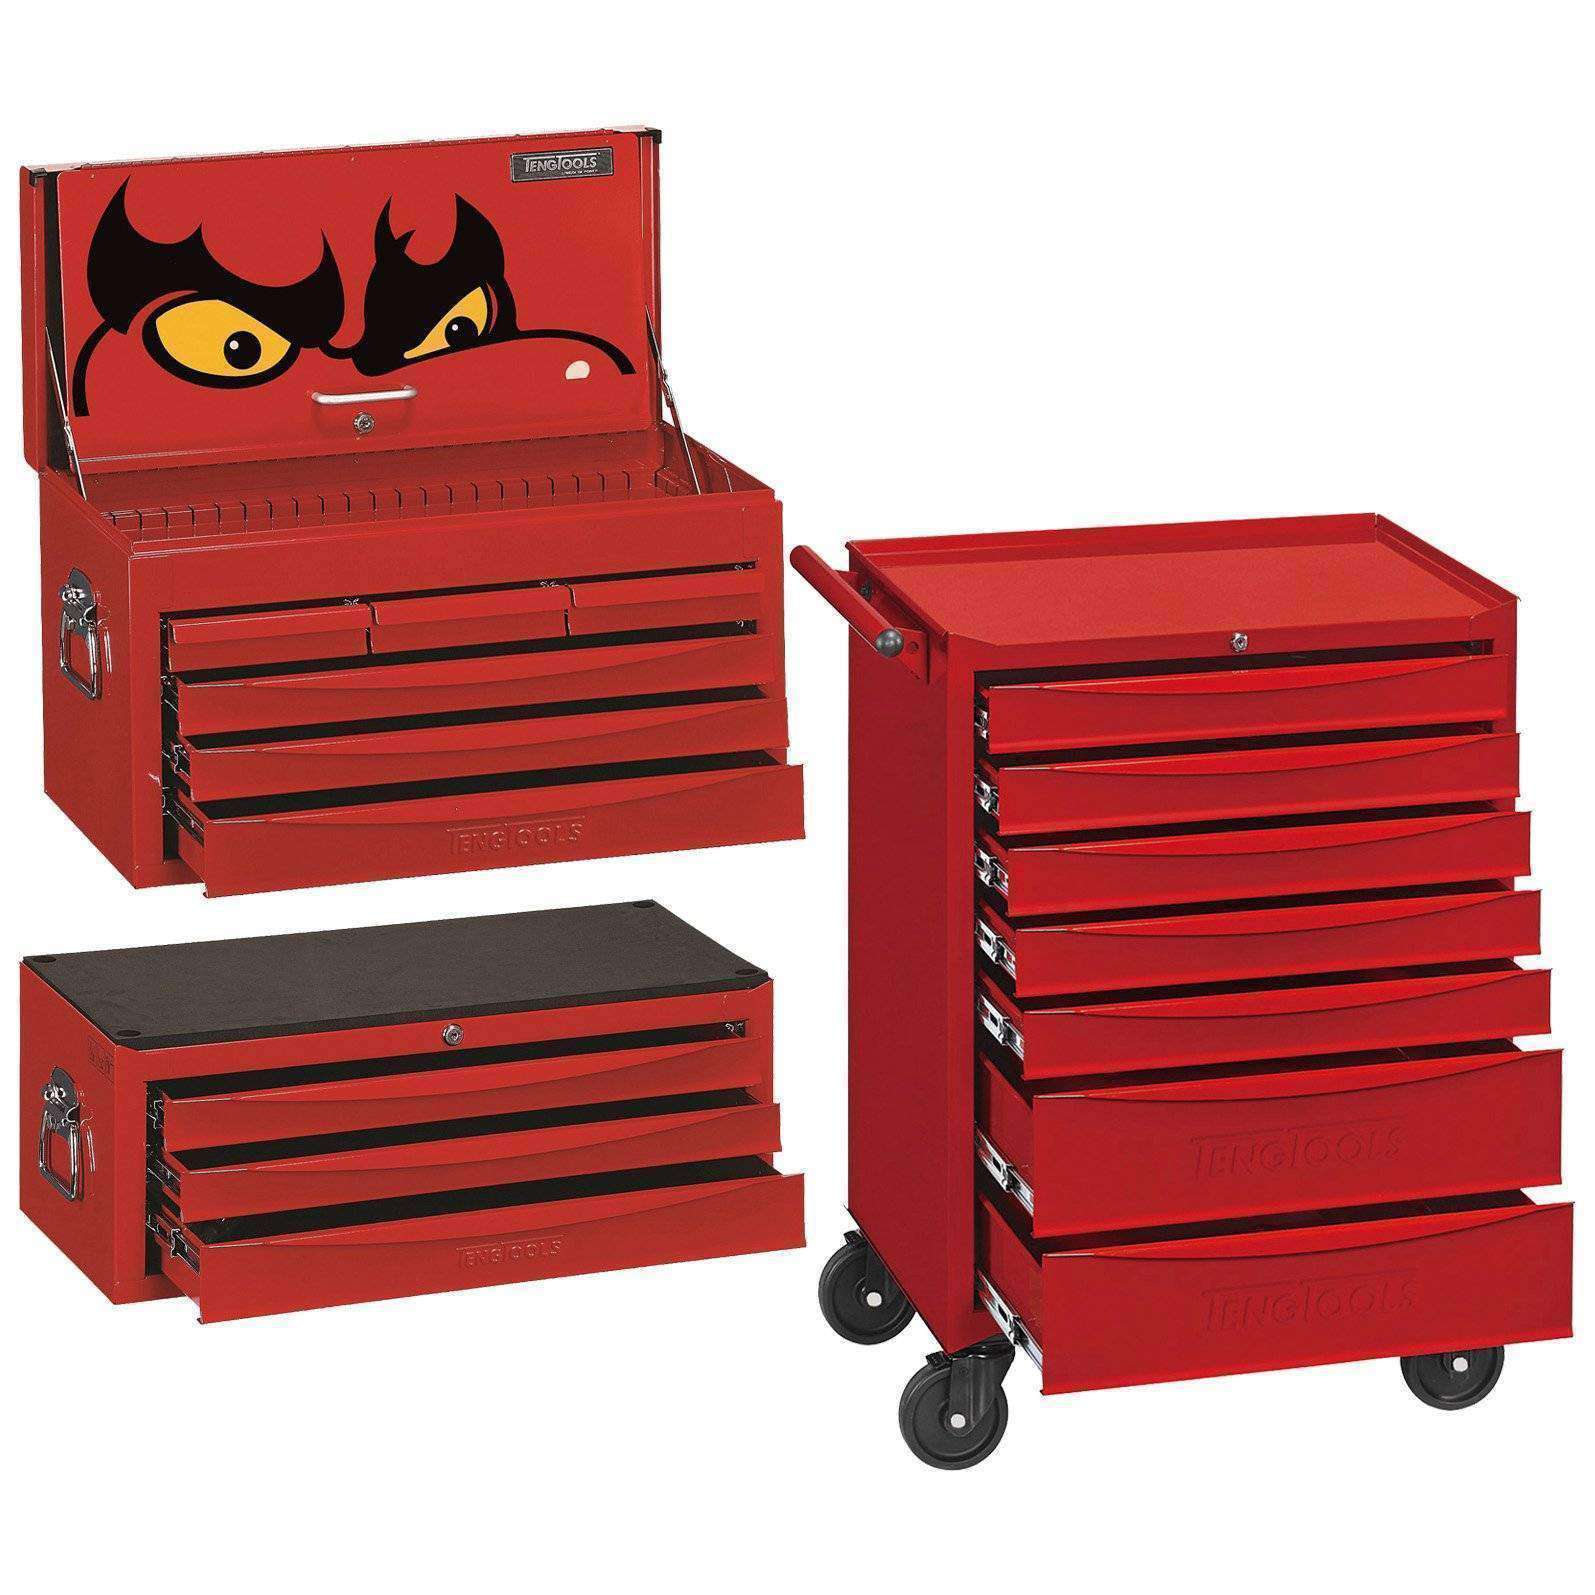 Teng Tools 7 Series 7 Drawer Roller Cabinet With 8 Series SV Middle And Top Boxes - TCW707EV